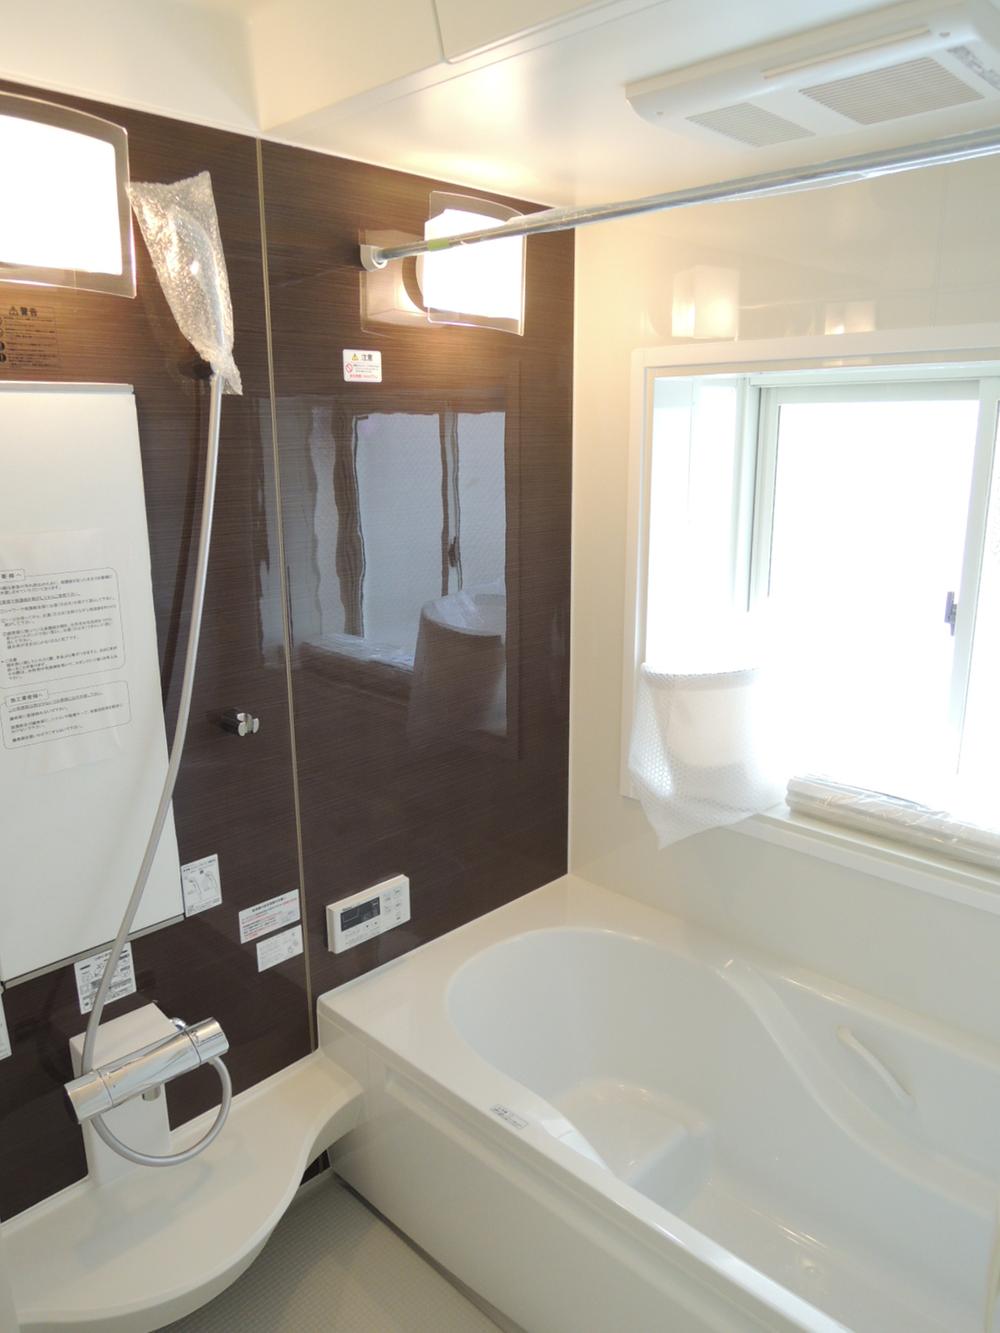 Same specifications photo (bathroom). With bathroom ventilation dryer (same specifications)